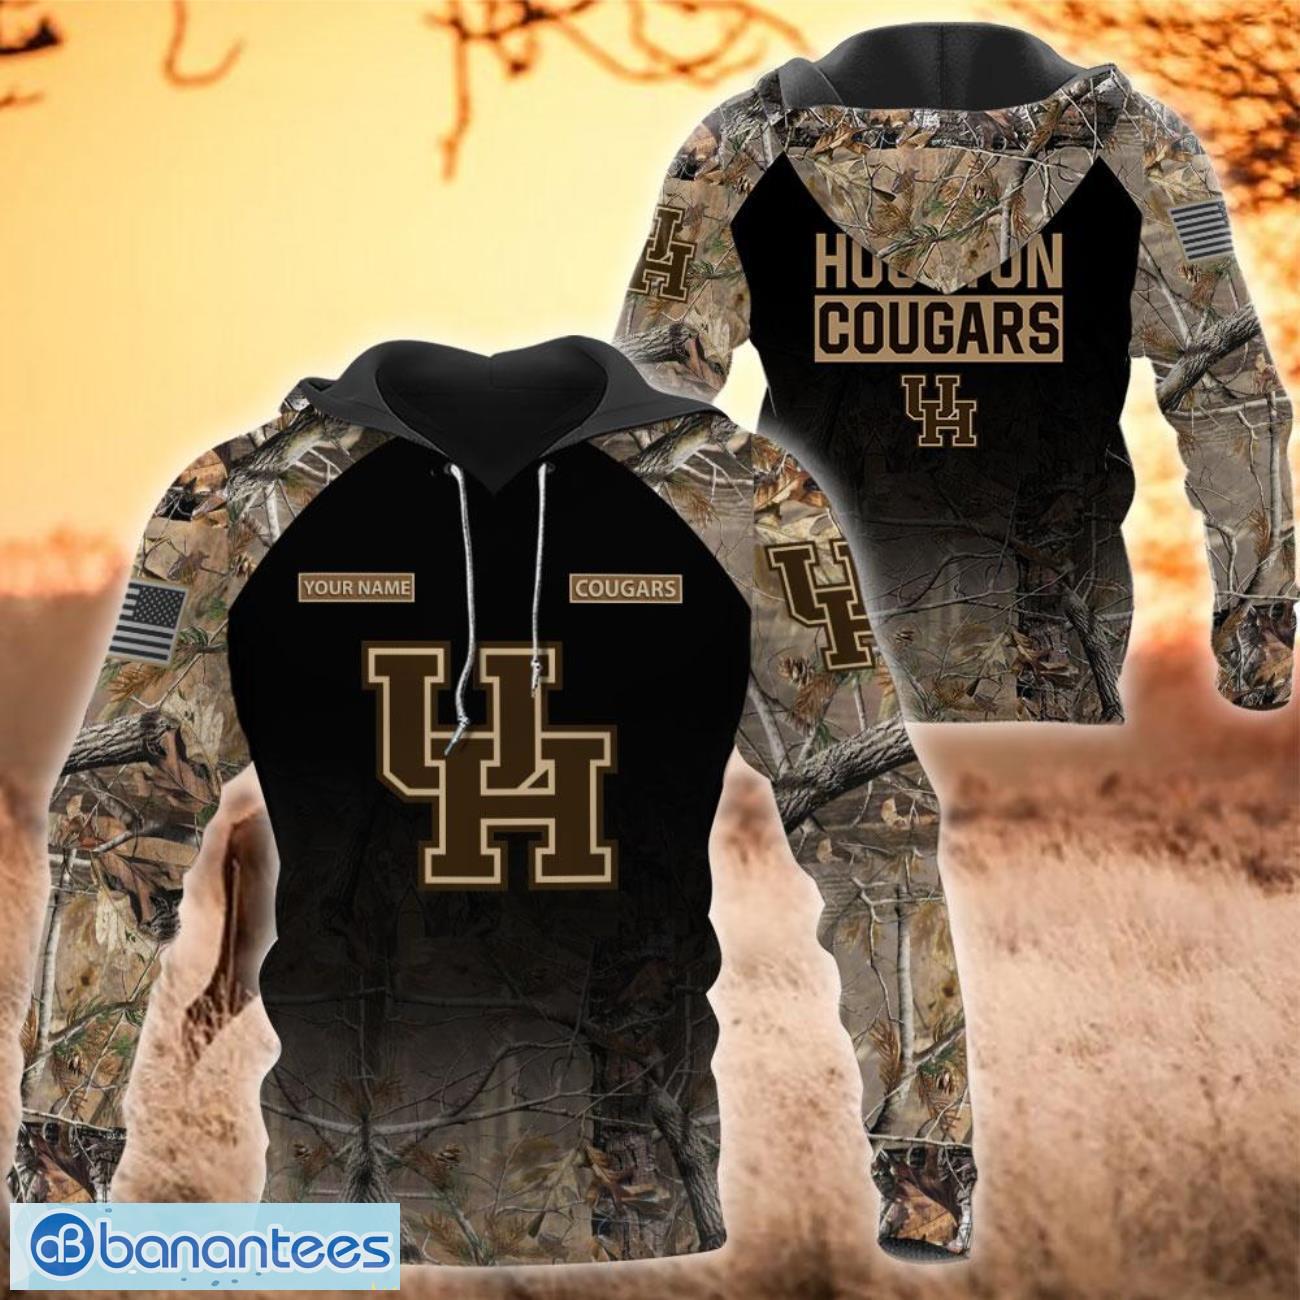 Houston Cougars Personalized Name Hunting Camo Style 3D Hoodie T Shirt Sweatshirt Zip Hoodie Product Photo 1